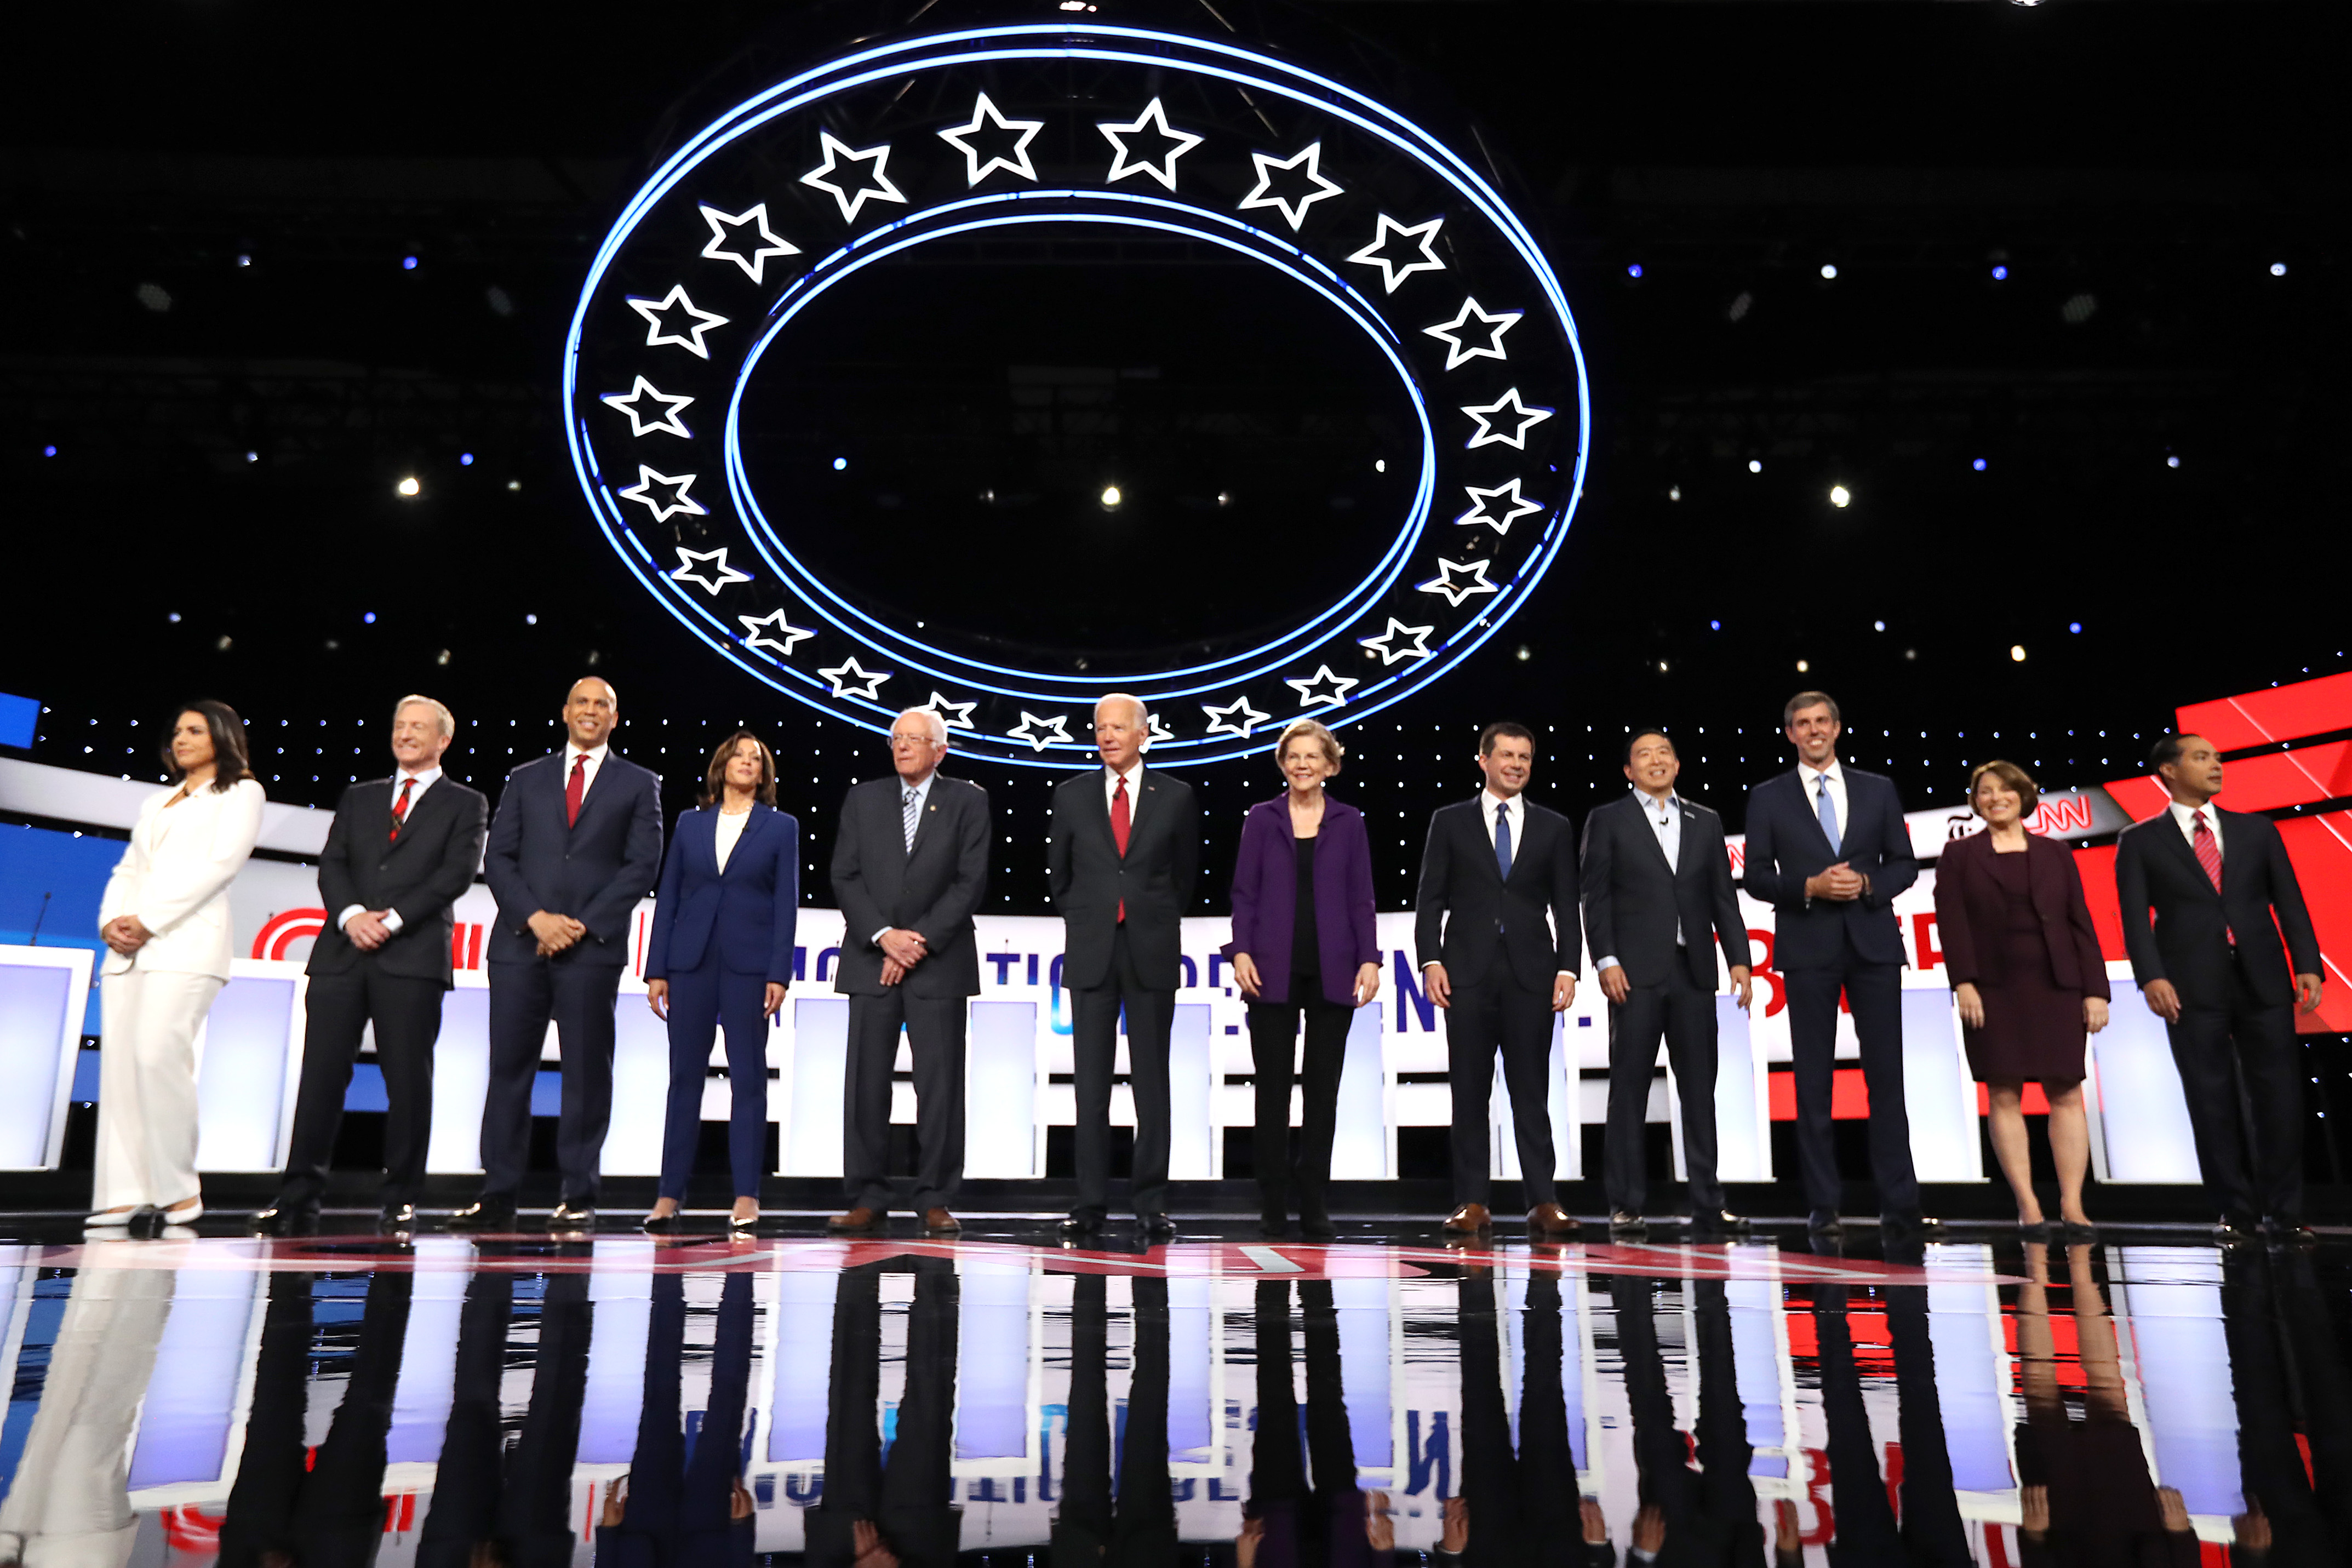 Candidates for the fourth Democratic presidential debate